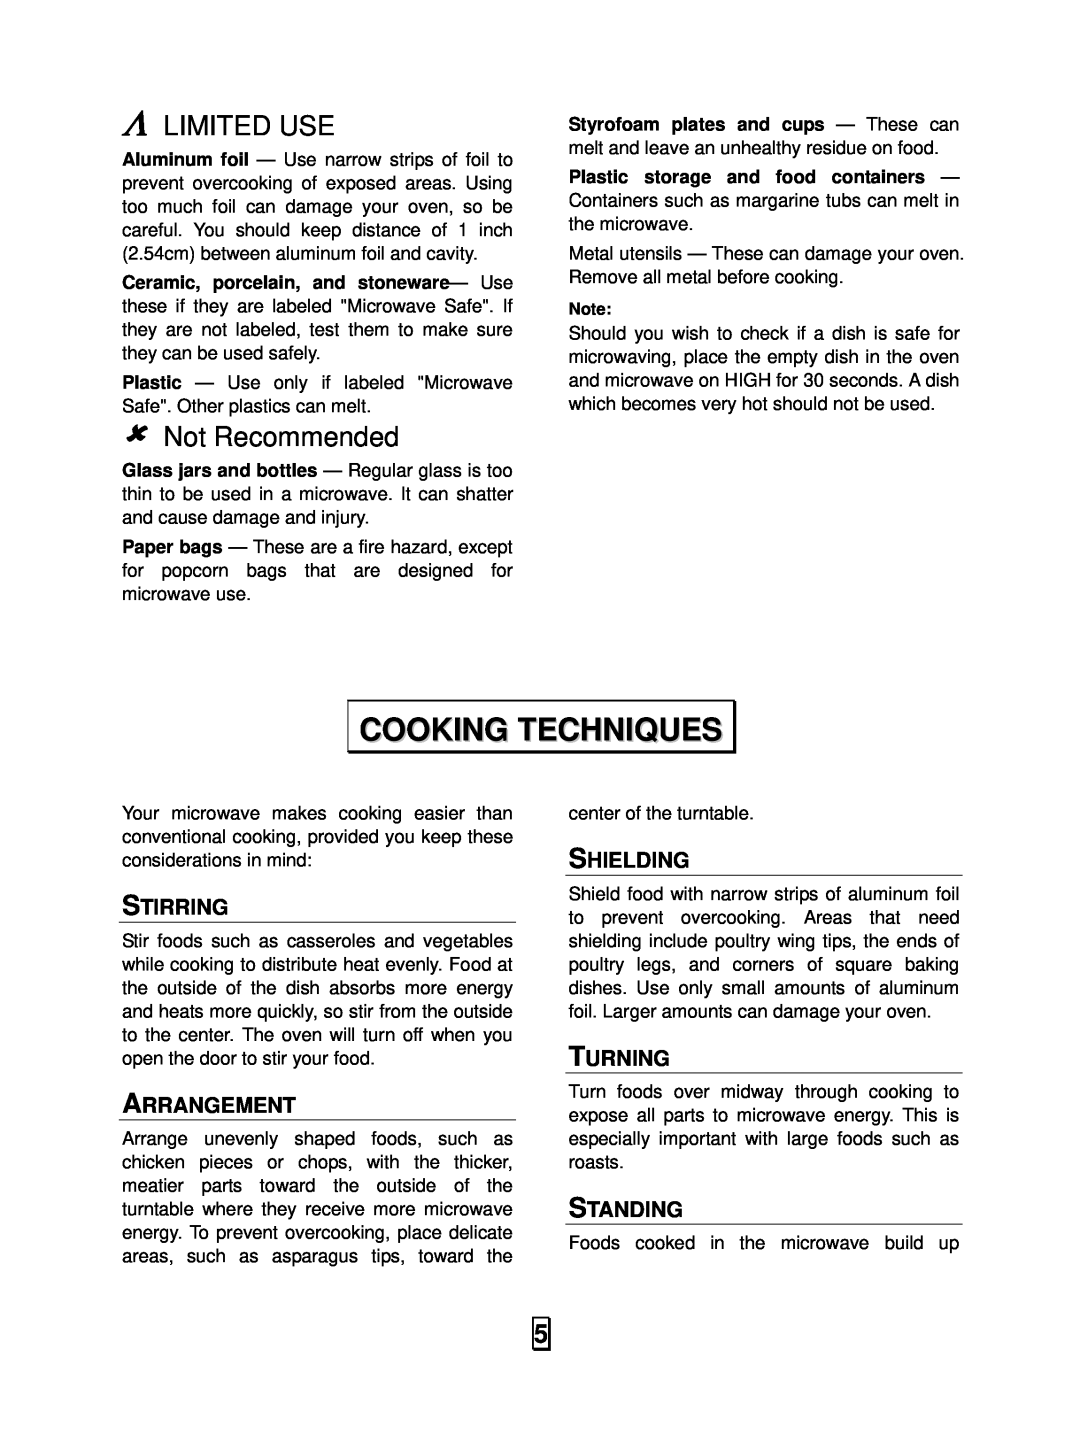 RCA RMW966 manual Cooking Techniques, Λ Limited Use, Not Recommended, Stirring, Arrangement, Shielding, Turning, Standing 